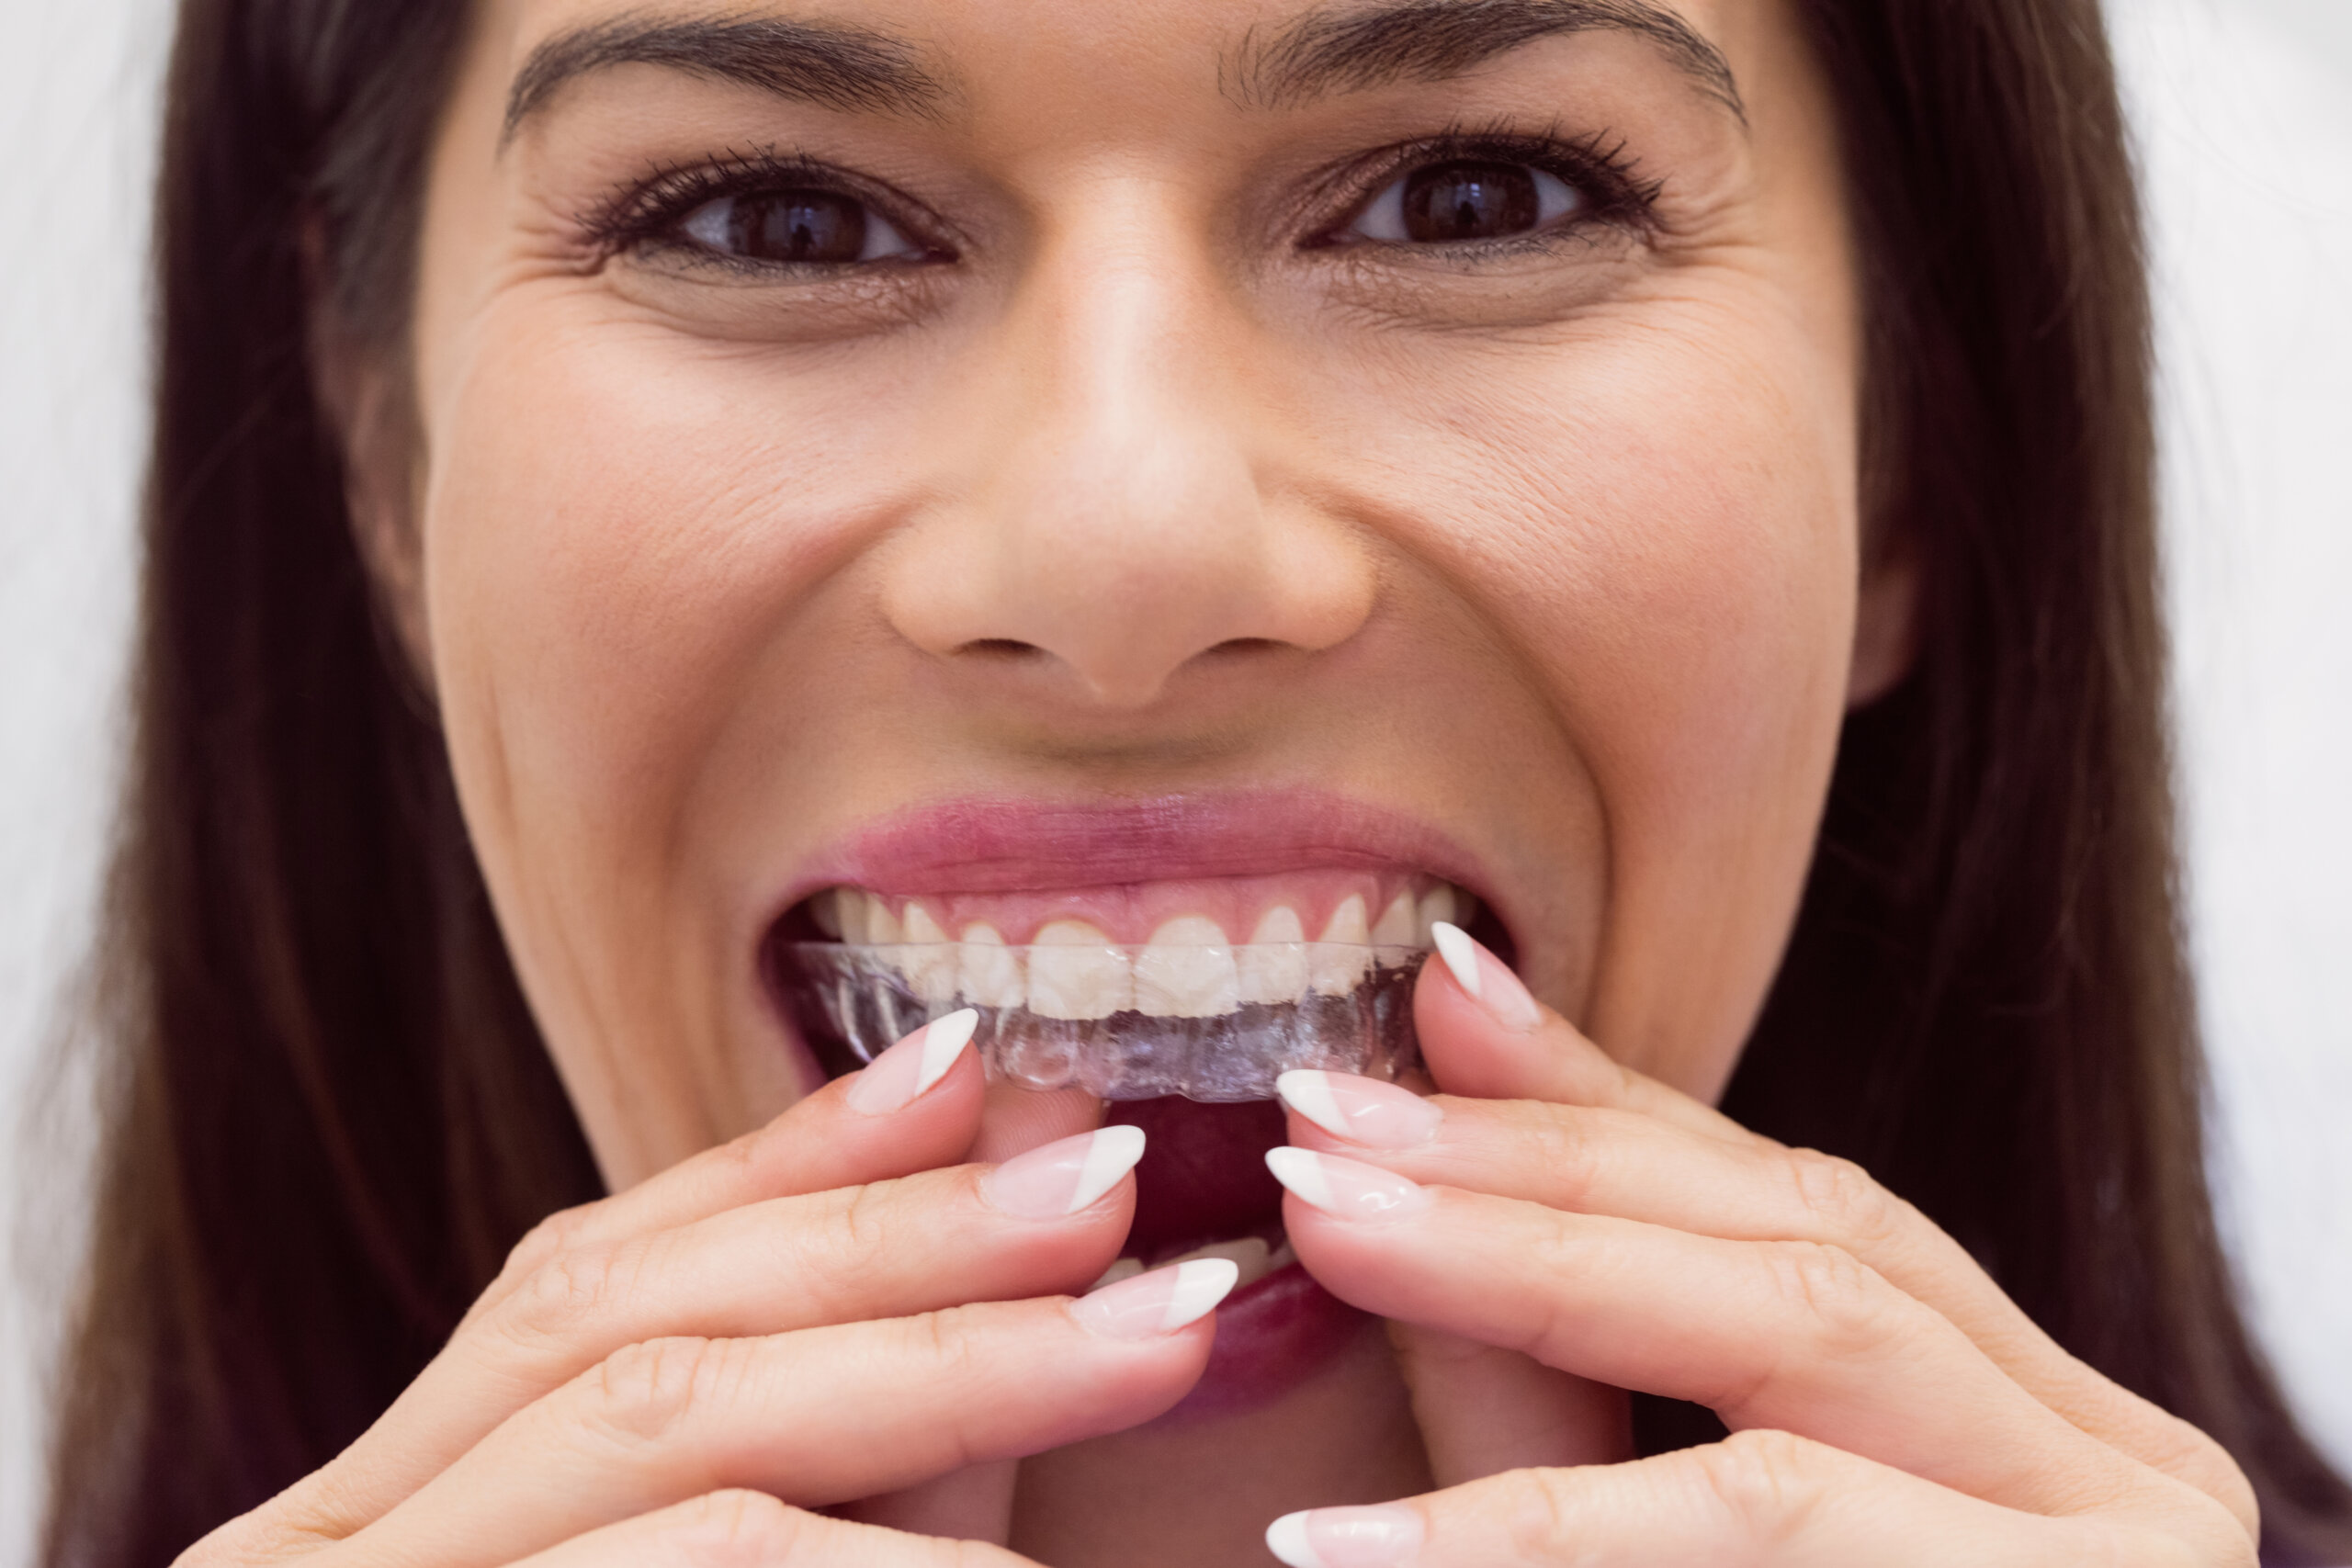 What is invisalign?